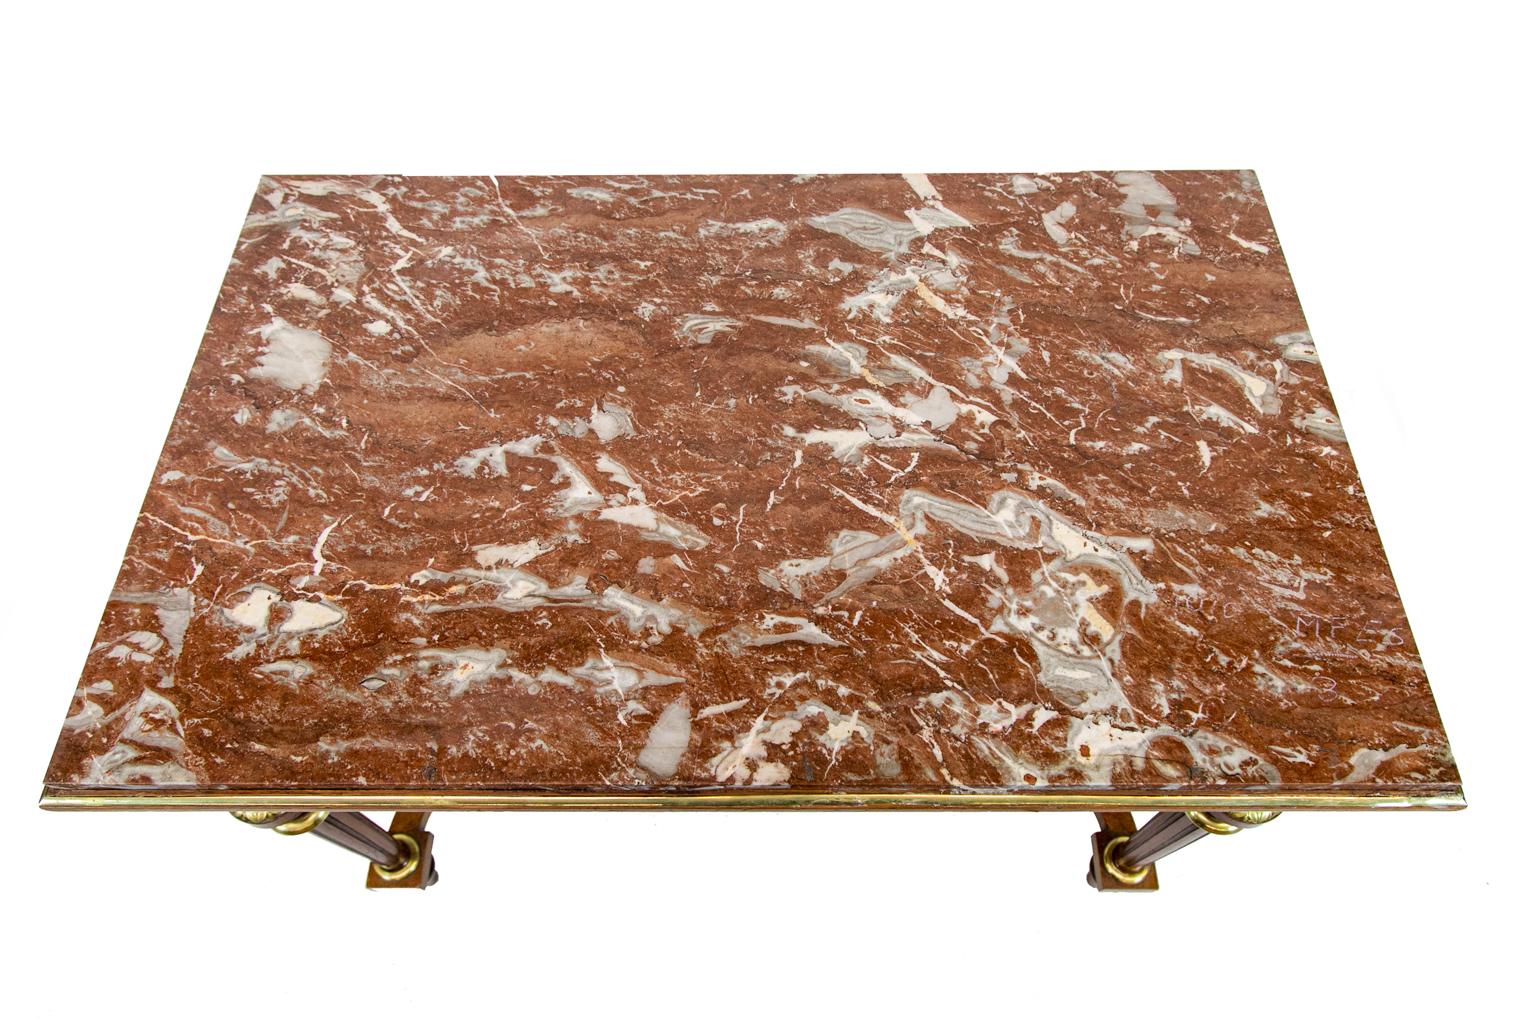 French marble top center table, with the marble having soft earth tones and is surrounded by a brass molded top. The base has brass molded panels and apron. Floral brass ornaments are on the fluted legs which have engraved brass leaf ornamentation.